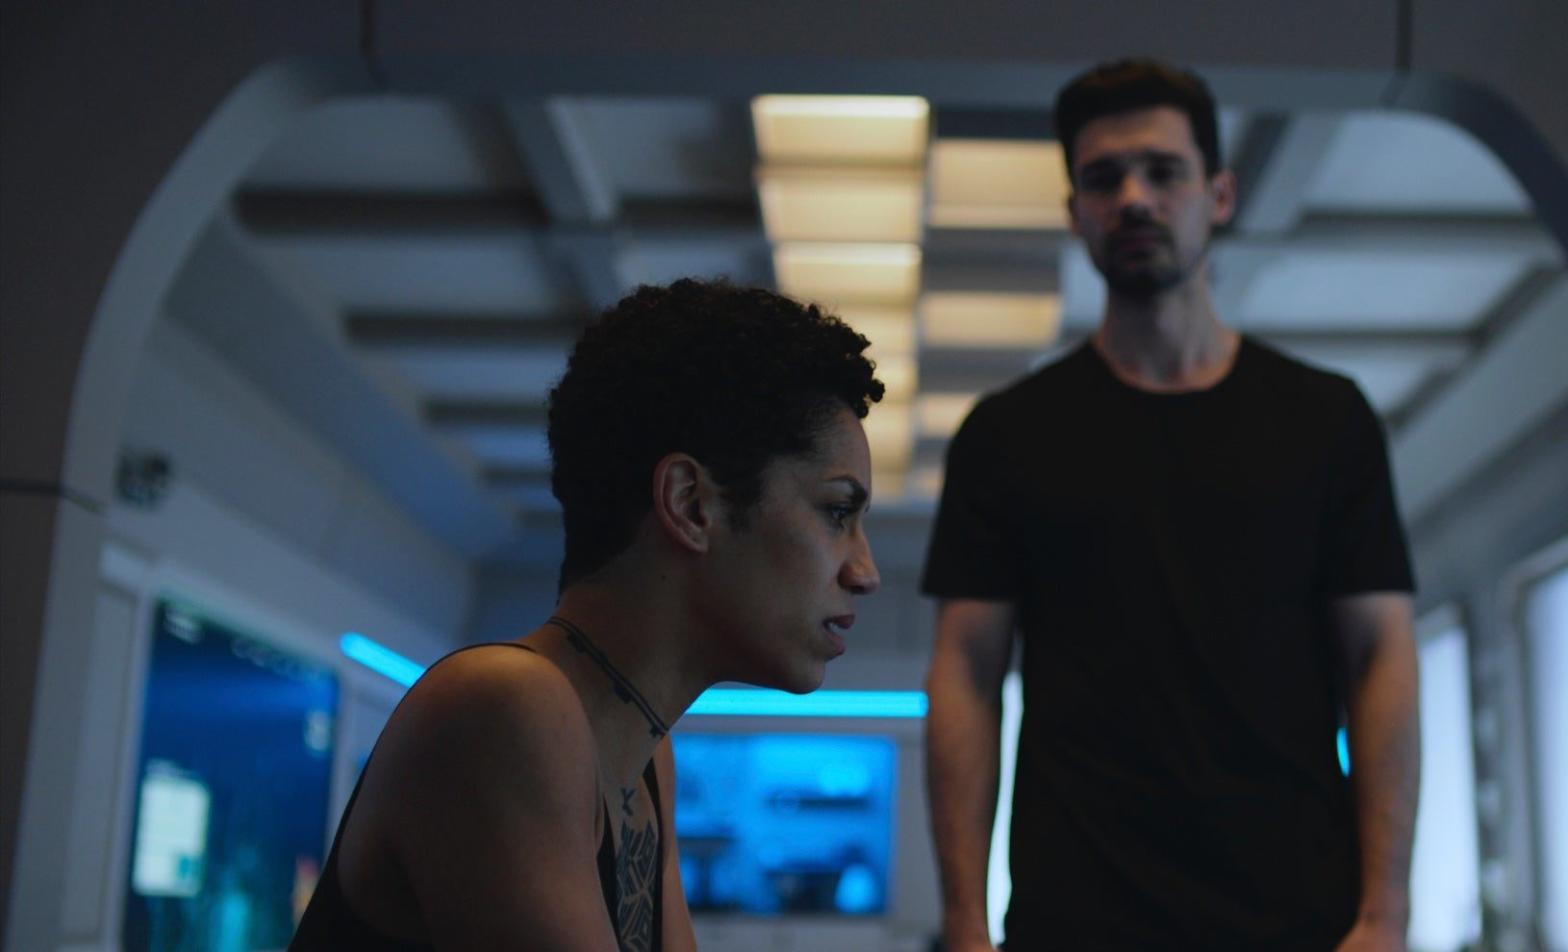 Flashback: a tense yet tender moment between Naomi (Dominique Tipper) and Holden (Steven Strait) at the start of season five. (Image: Amazon Studios)